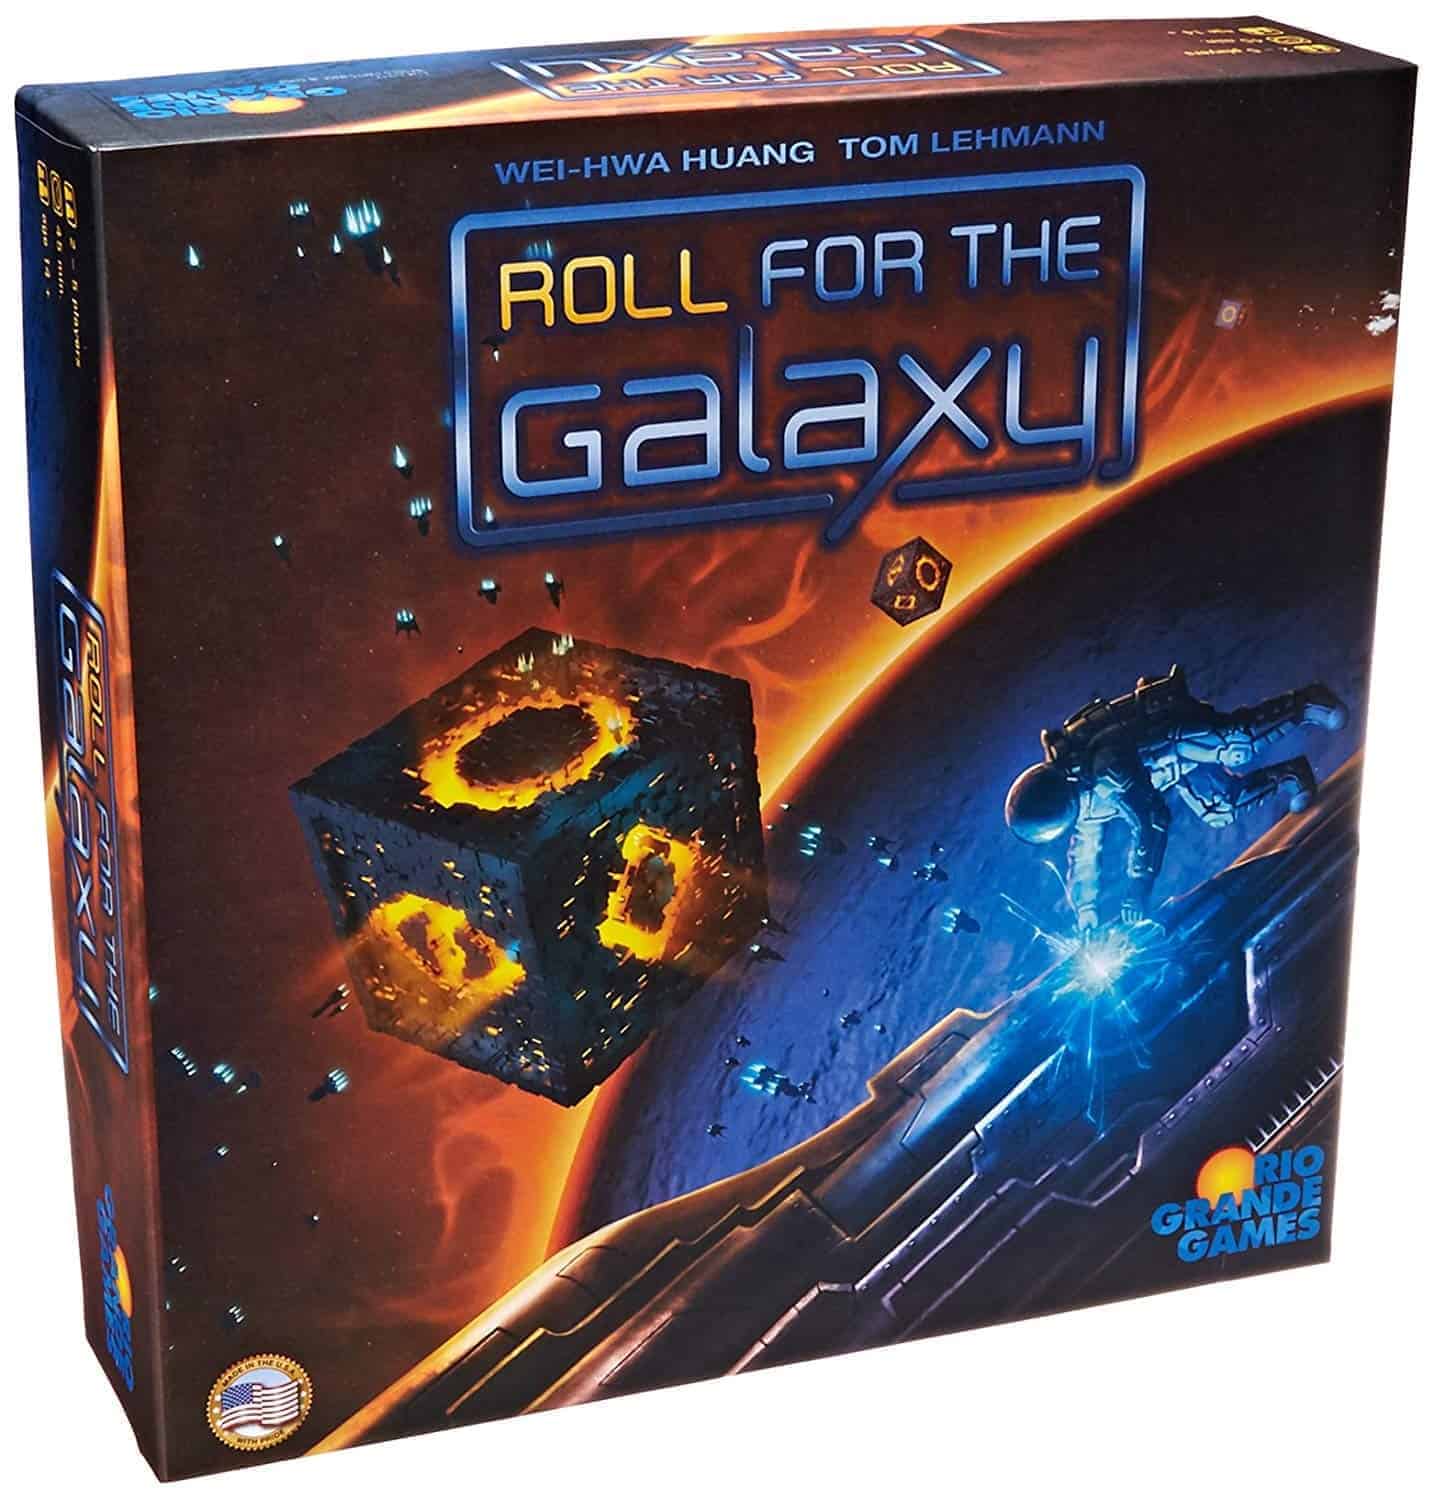 Roll for the Galaxy is the re-implementation of the Race for the Galaxy that makes it the best 3 player board game in space. Check it out!